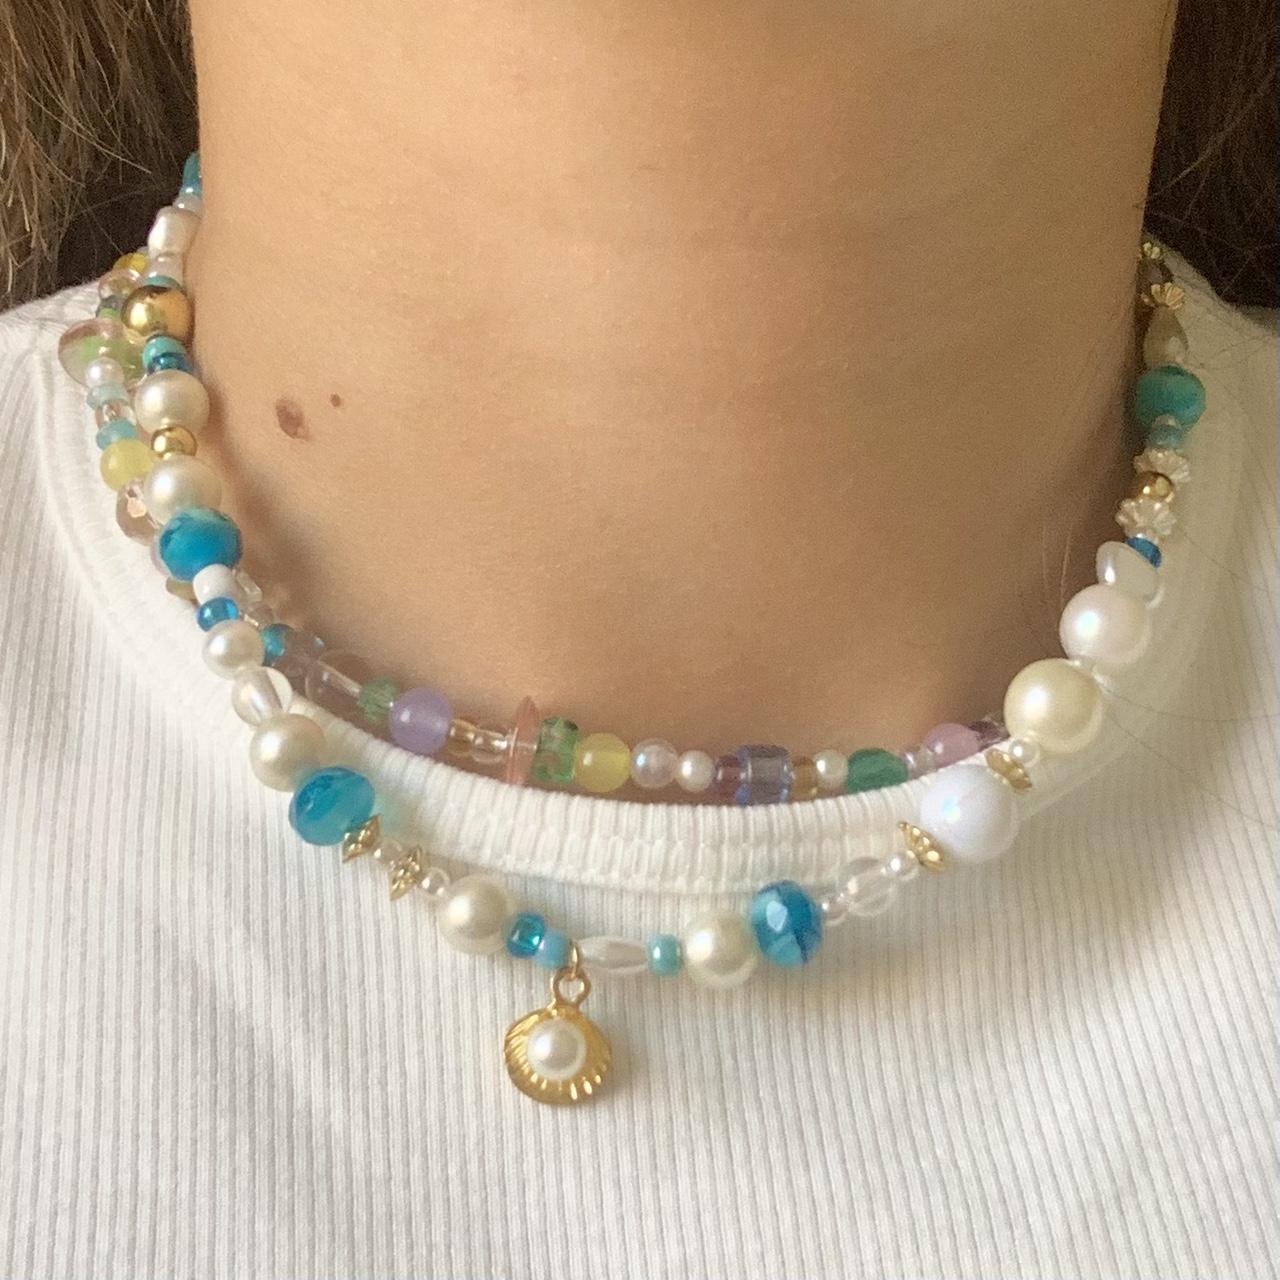 Women's White and Blue Jewellery